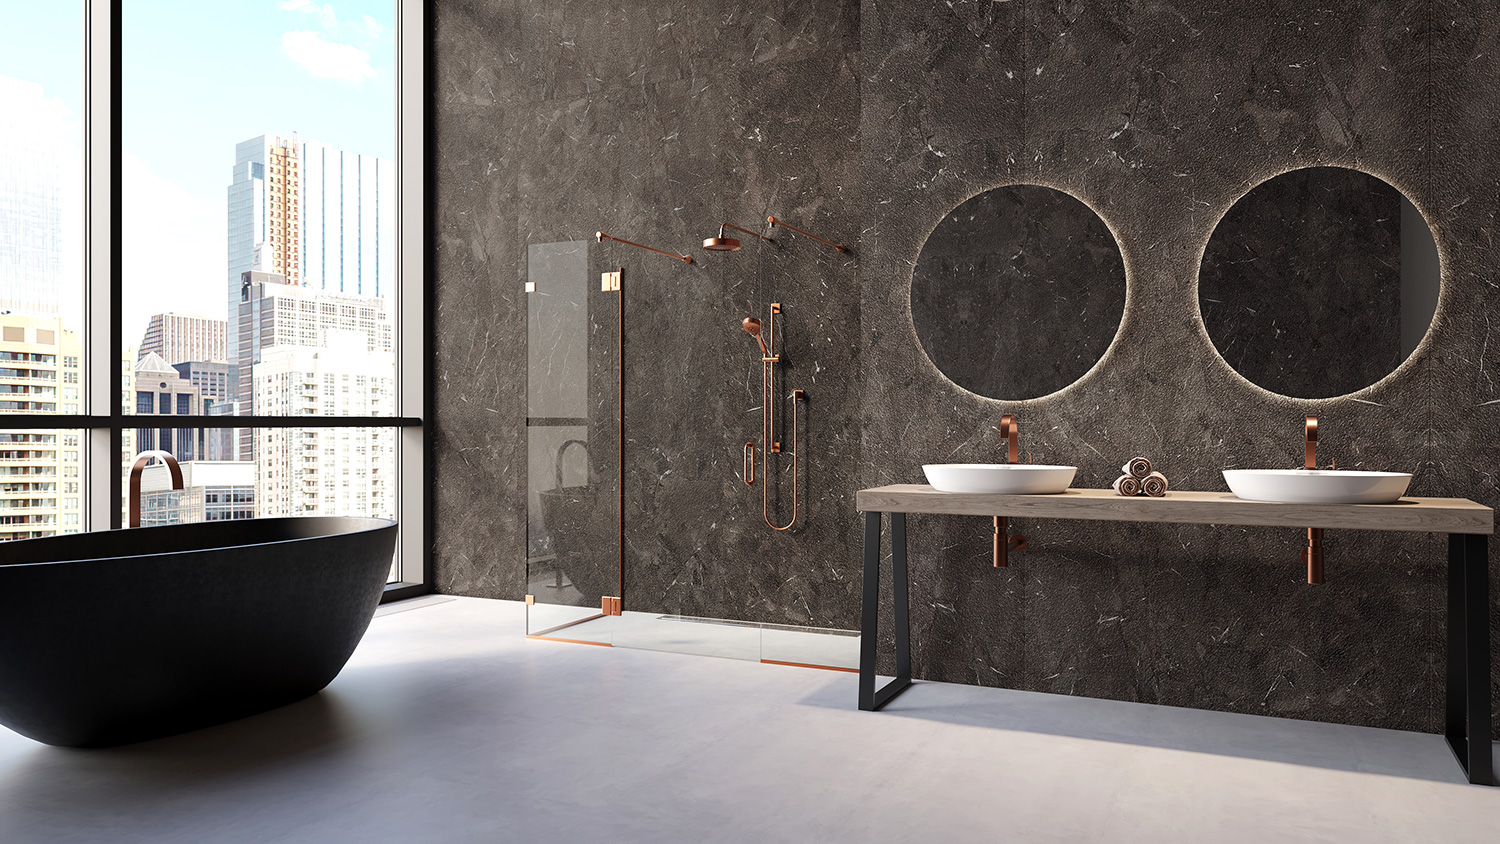 Showered with choice over modern bathroom design